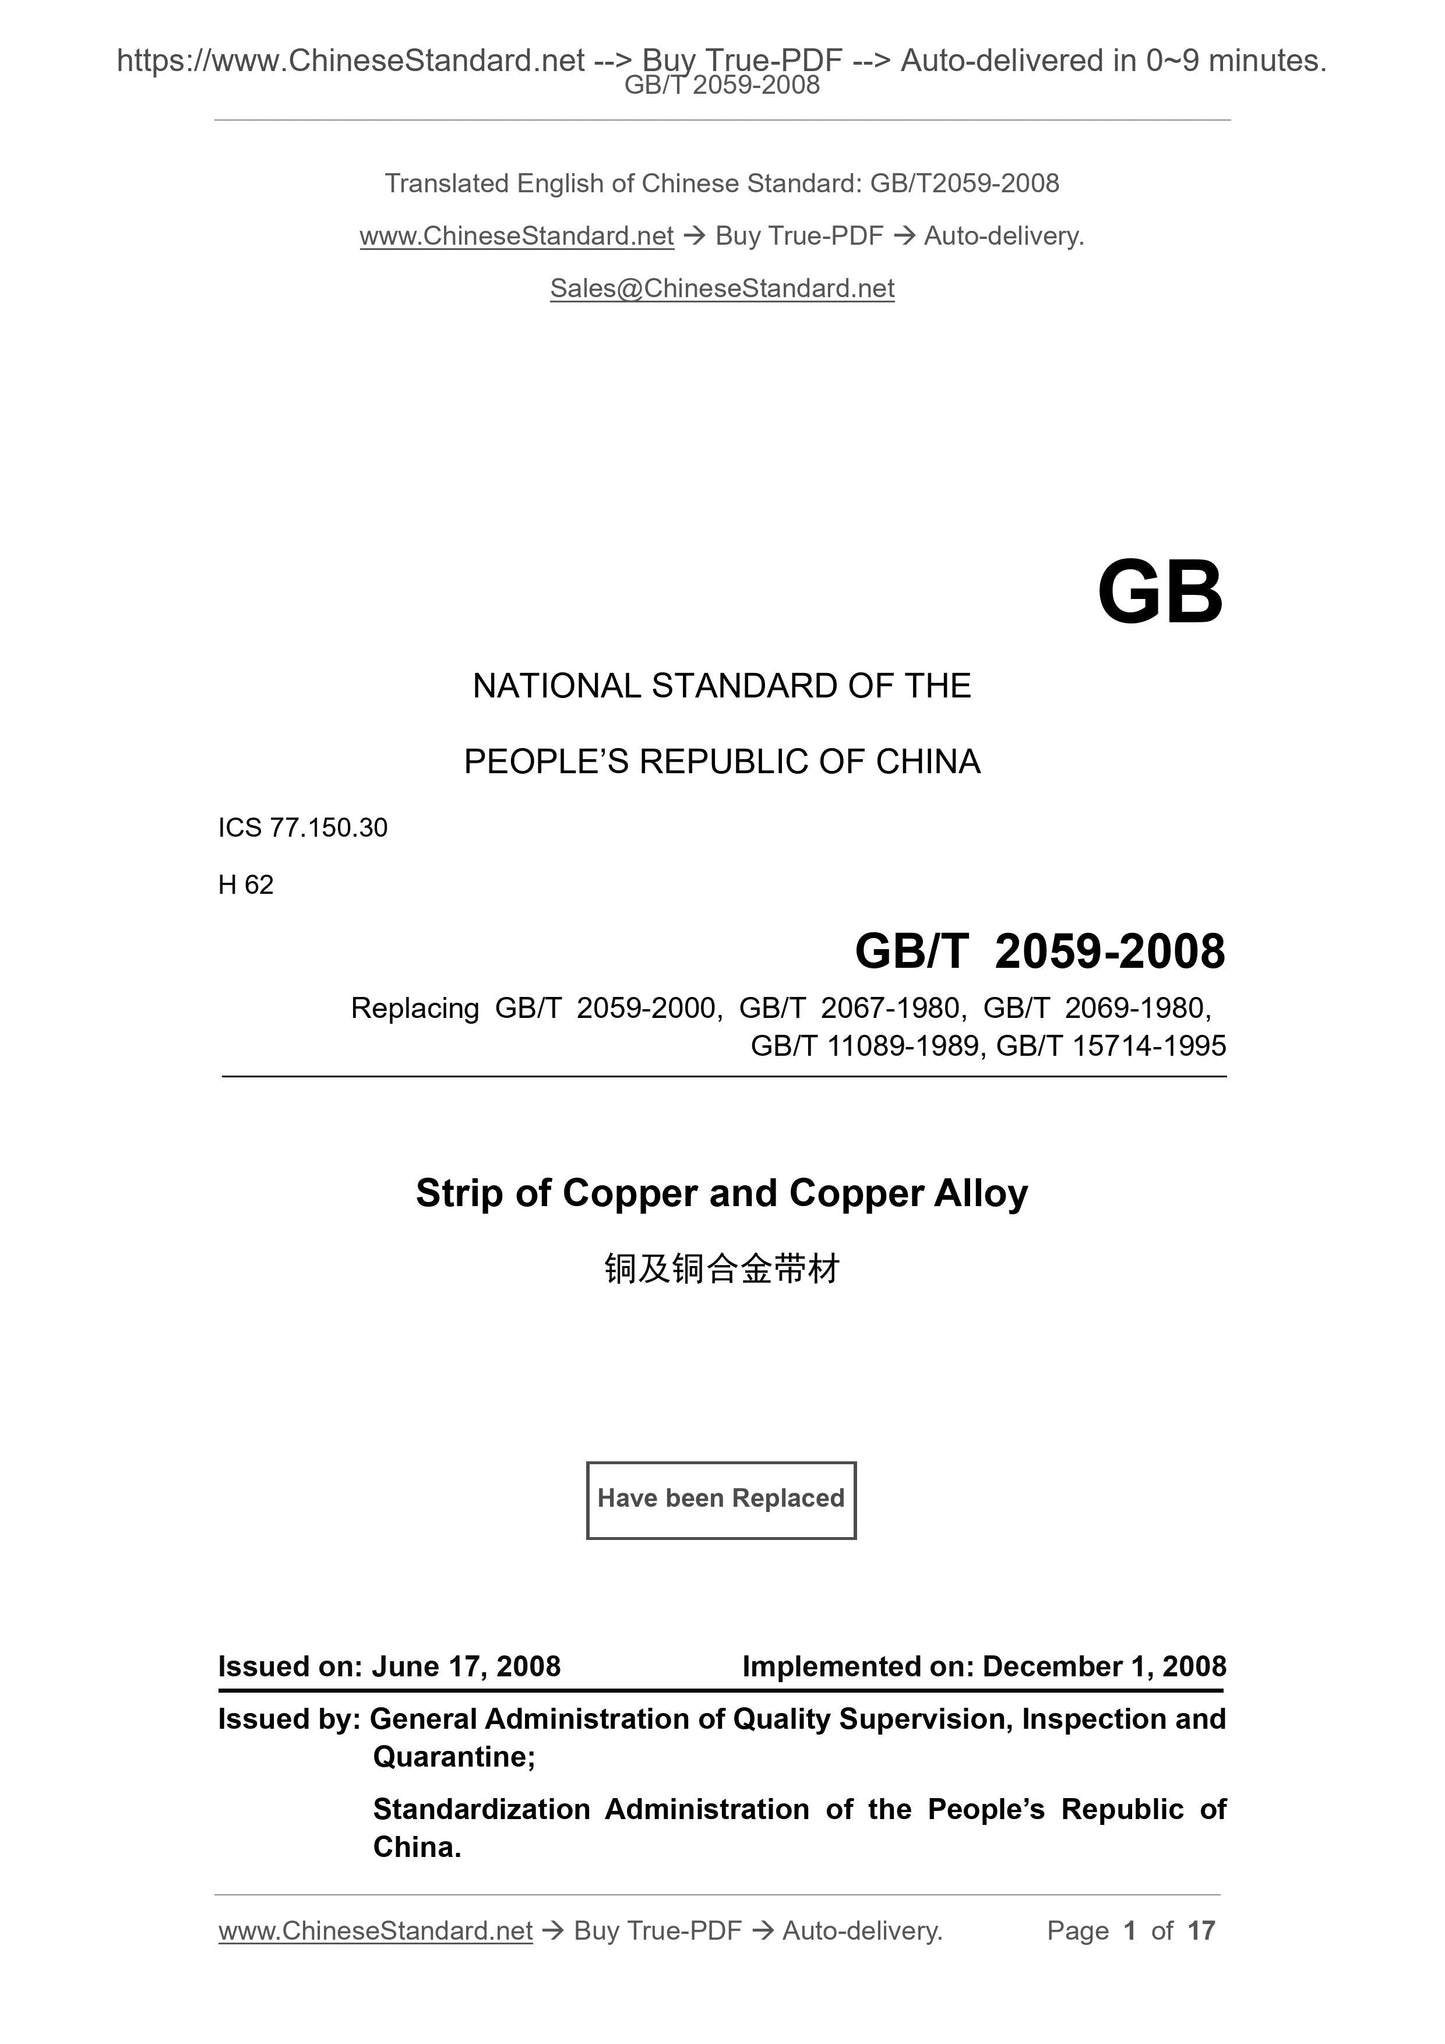 GB/T 2059-2008 Page 1